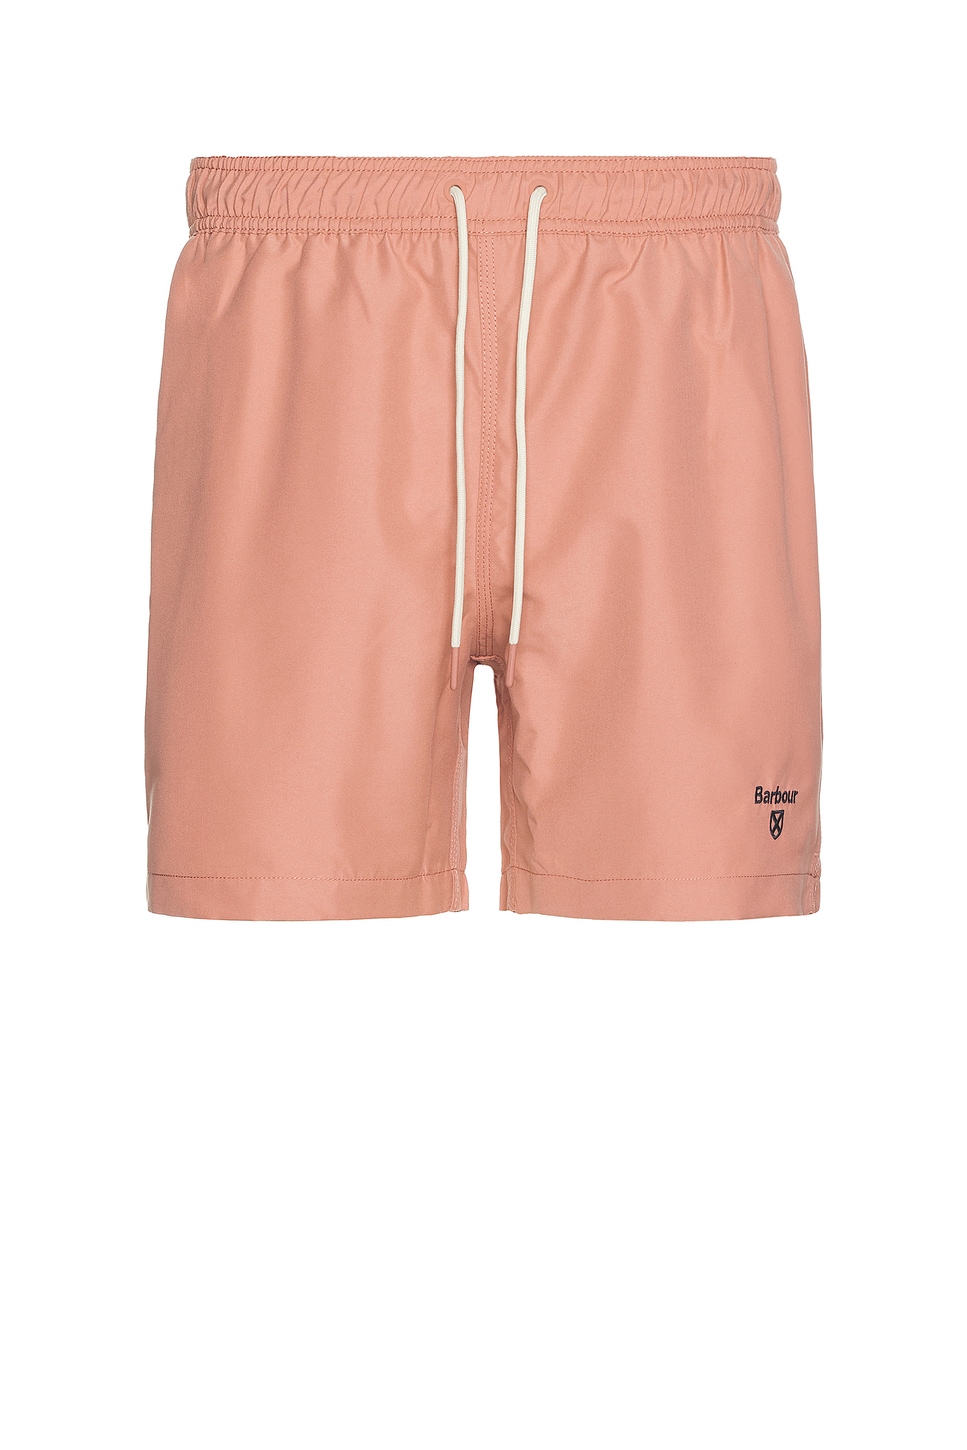 Image 1 of Barbour Staple Logo 5" Swim Short in Pink Clay